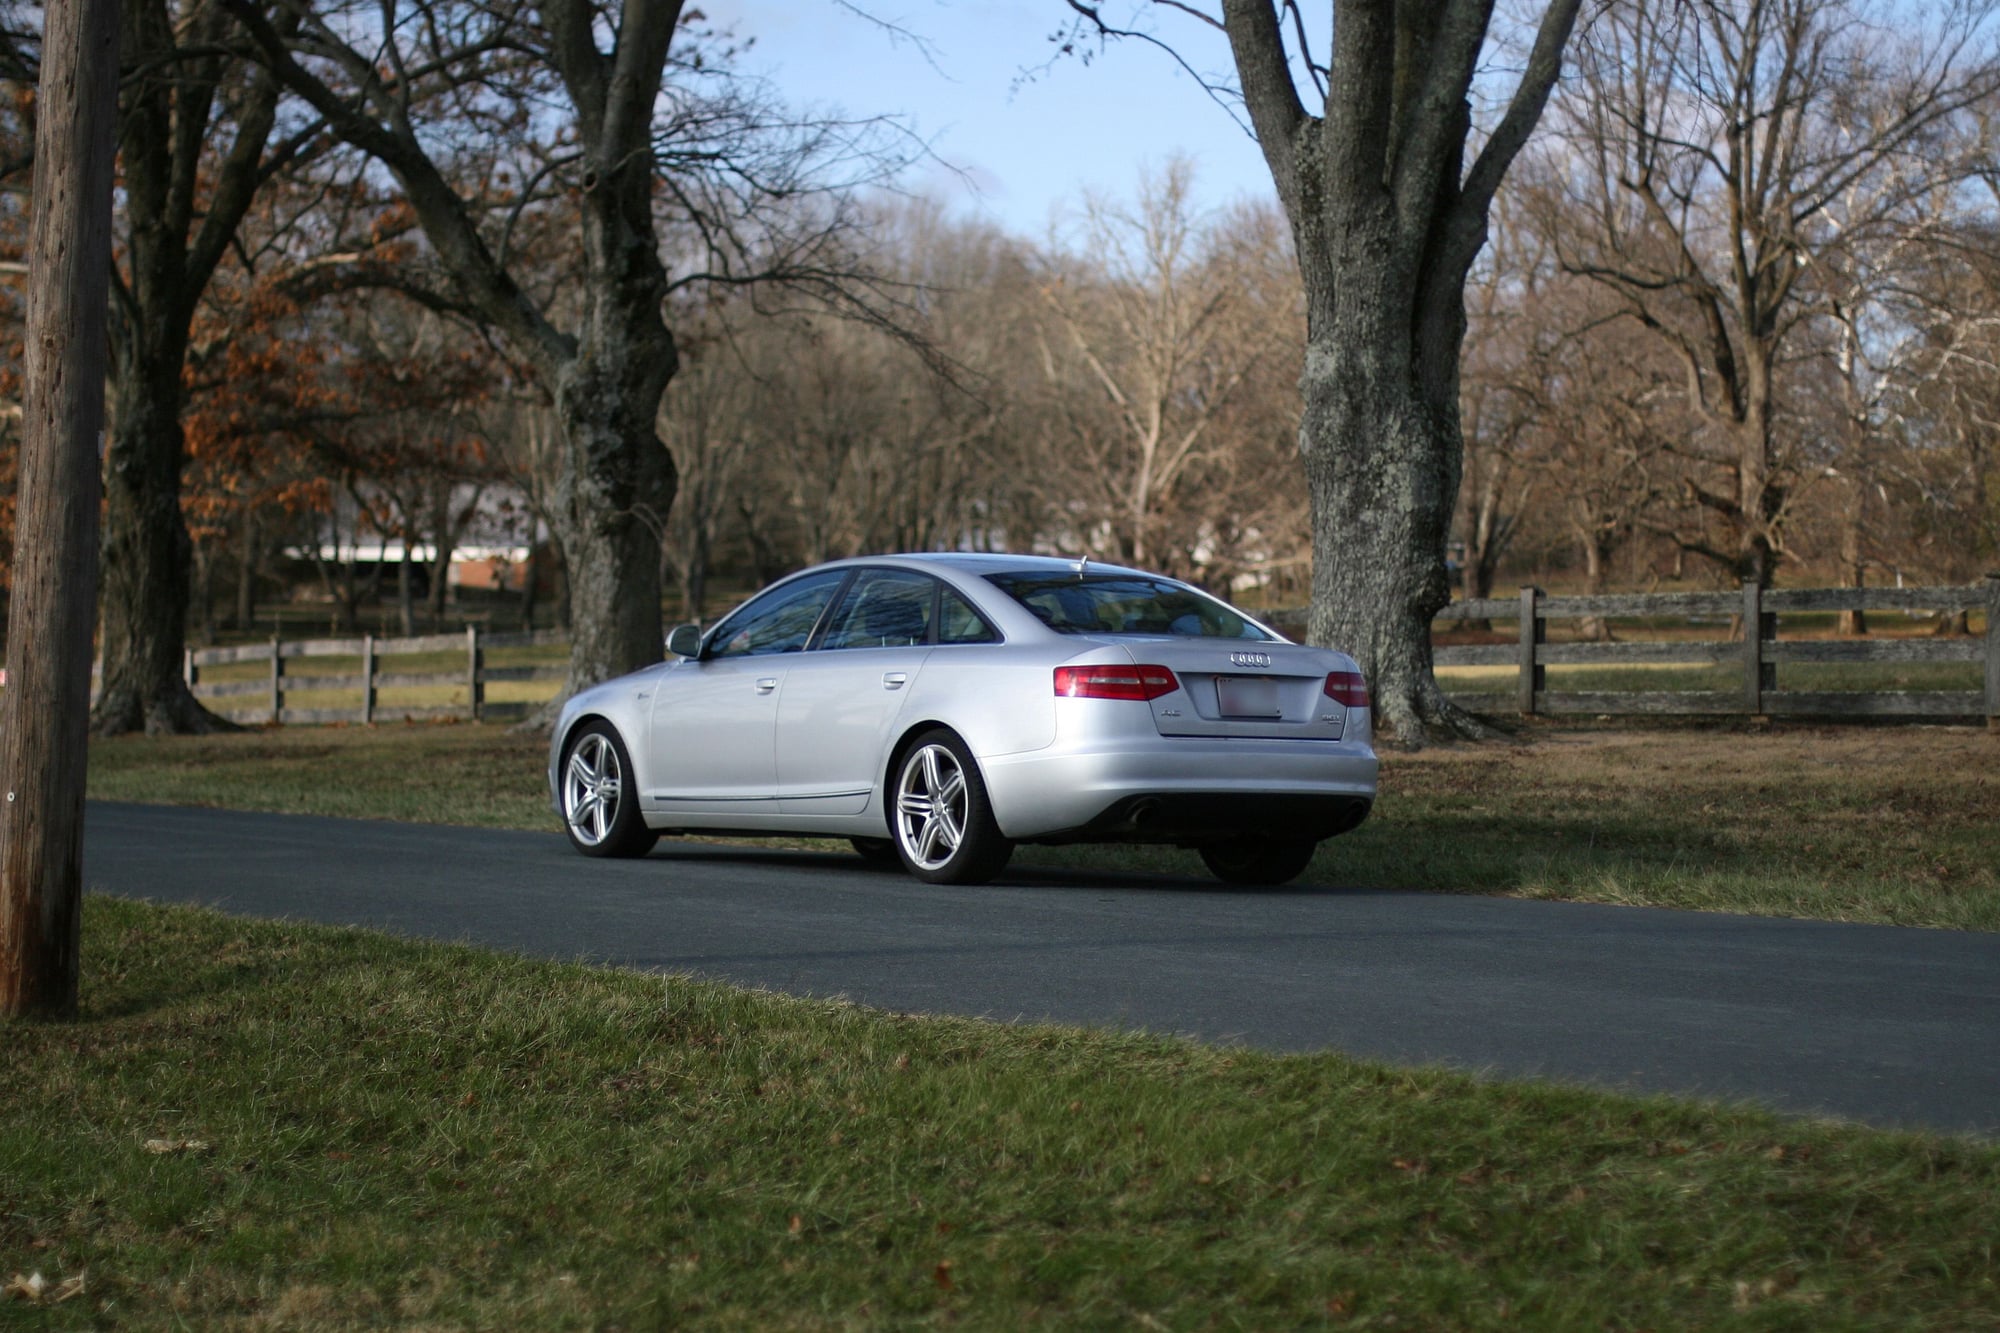 2010 Audi A6 Quattro - A6 3.0T Quattro Prestige Sport Package - Used - VIN WAUKGAFB1AN052810 - 144,000 Miles - 6 cyl - 4WD - Automatic - Sedan - Silver - Hunt Valley, MD 21030, United States